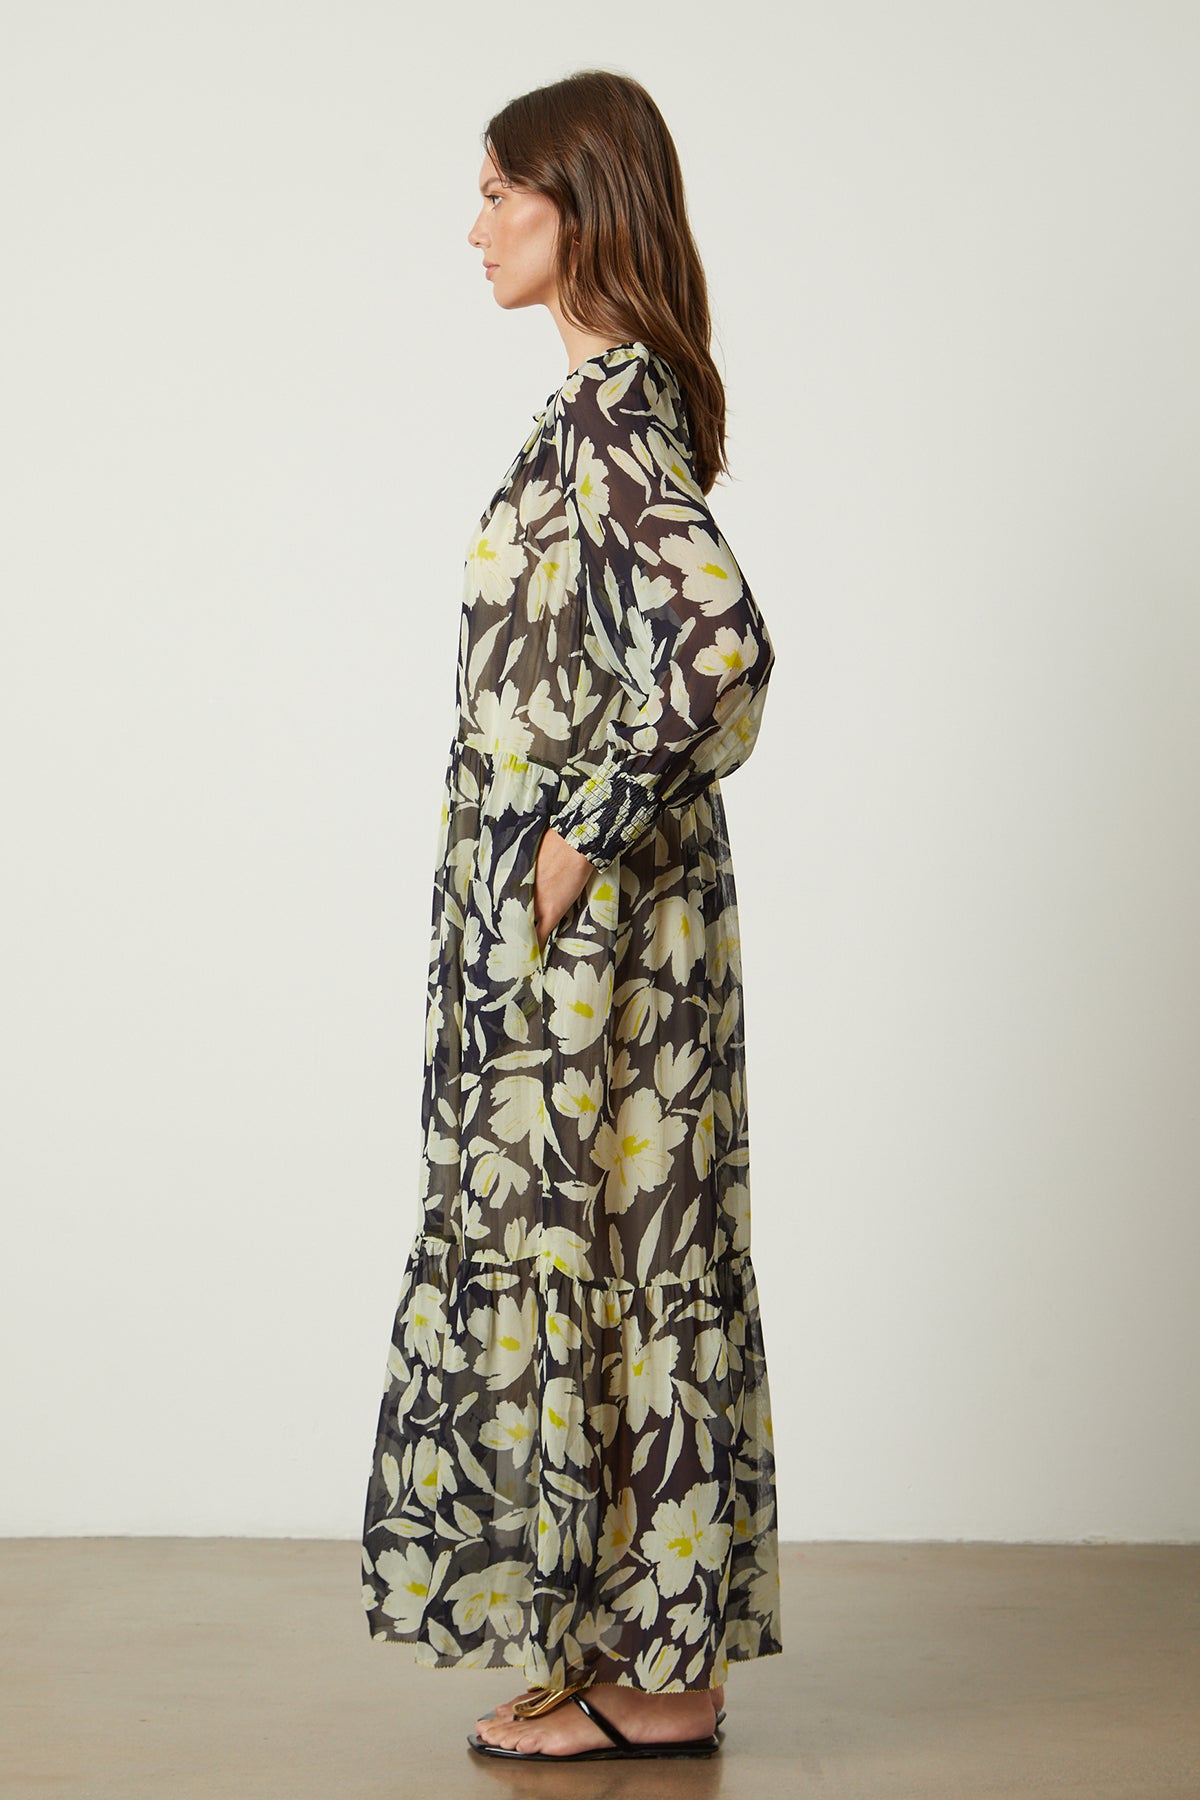   The back view of a woman wearing the Velvet by Graham & Spencer Serena Printed Maxi Dress. 